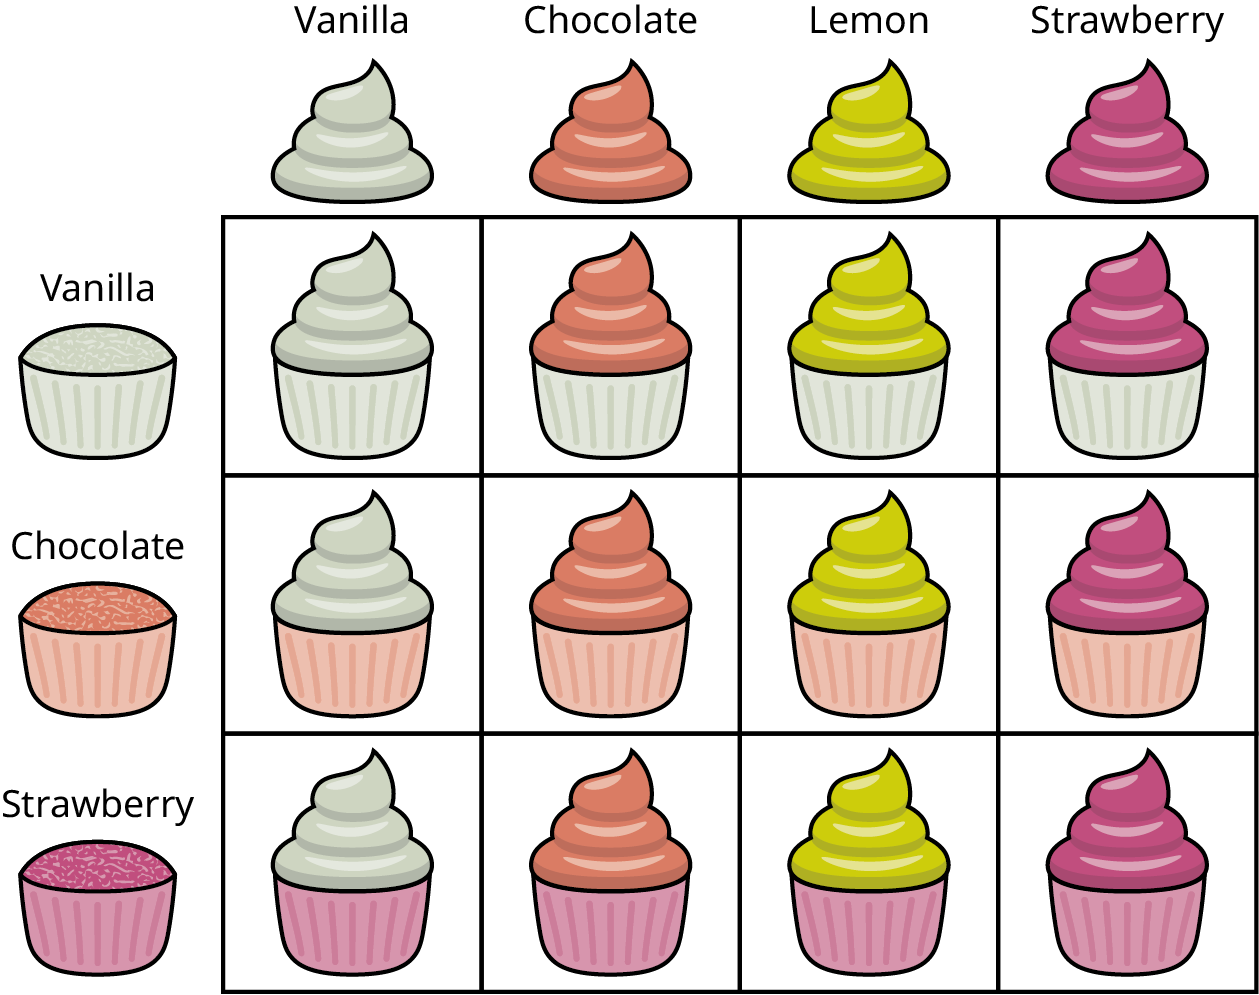 A rectangular grid with 3 rows and 4 columns. The row headers representing the cakes show vanilla, chocolate, and strawberry. The column headers representing the frostings show vanilla, chocolate, lemon, and strawberry. Data from the grid are as follows. Row 1: vanilla cake with vanilla frosting, vanilla cake with chocolate frosting, vanilla cake with lemon frosting, and vanilla cake with strawberry frosting. Row 2: chocolate cake with vanilla frosting, chocolate cake with chocolate frosting, chocolate cake with lemon frosting, and chocolate cake with strawberry frosting. Row 3: strawberry cake with vanilla frosting, strawberry cake with chocolate frosting, strawberry cake with lemon frosting, and strawberry cake with strawberry frosting.